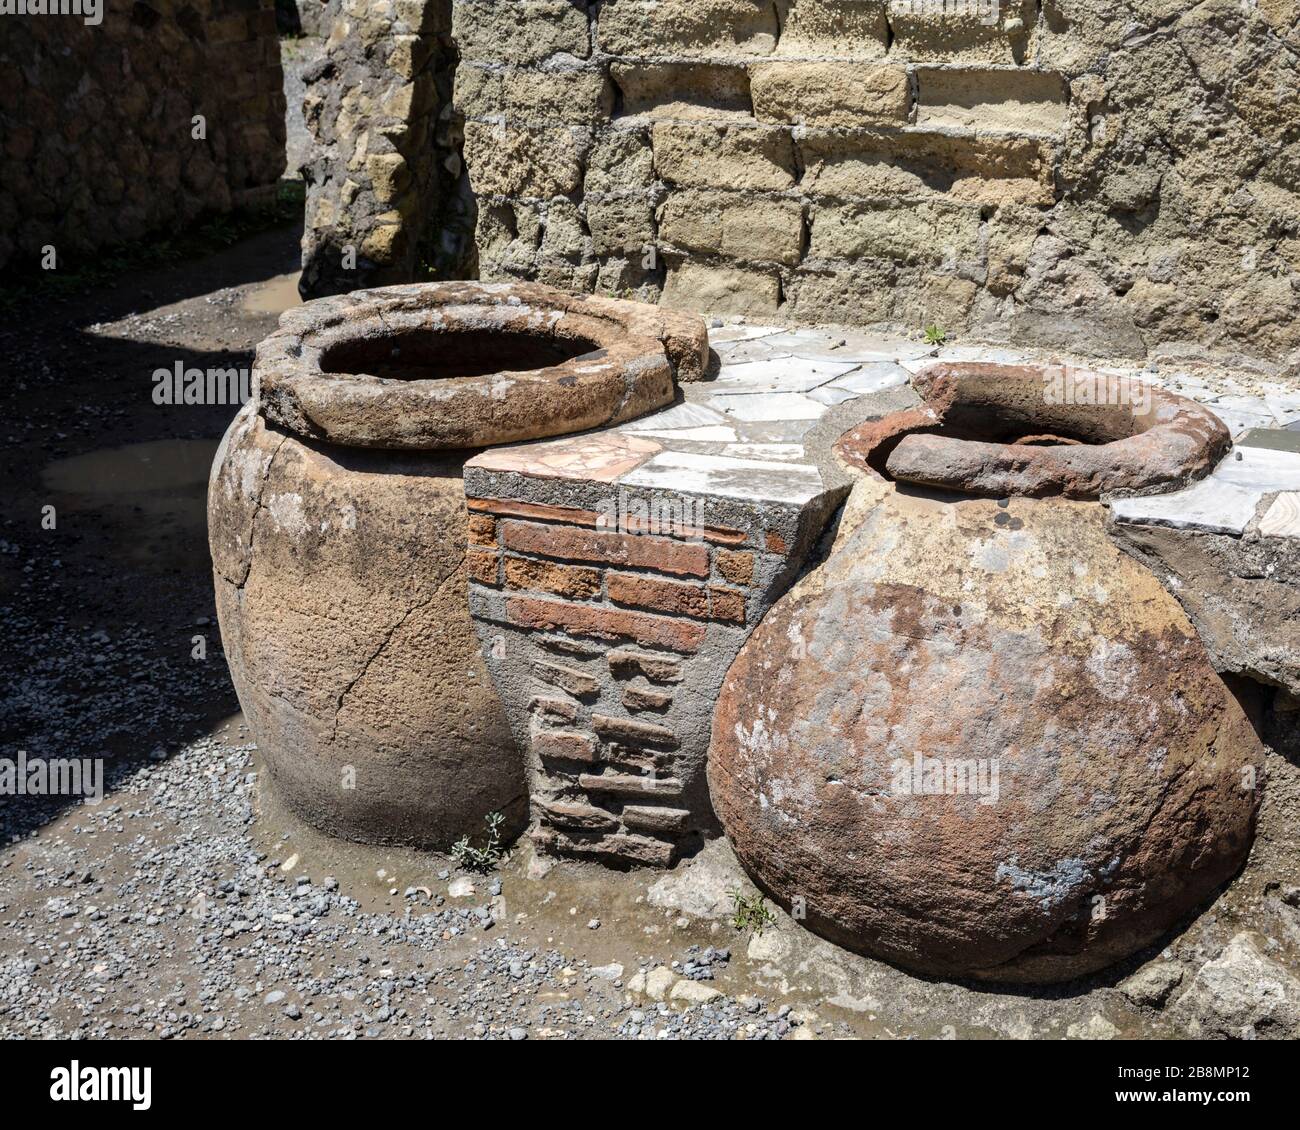 Two exposed food storage containers in the remains of a Roman food outlet, Herculaneum, Campania, Italy. Stock Photo